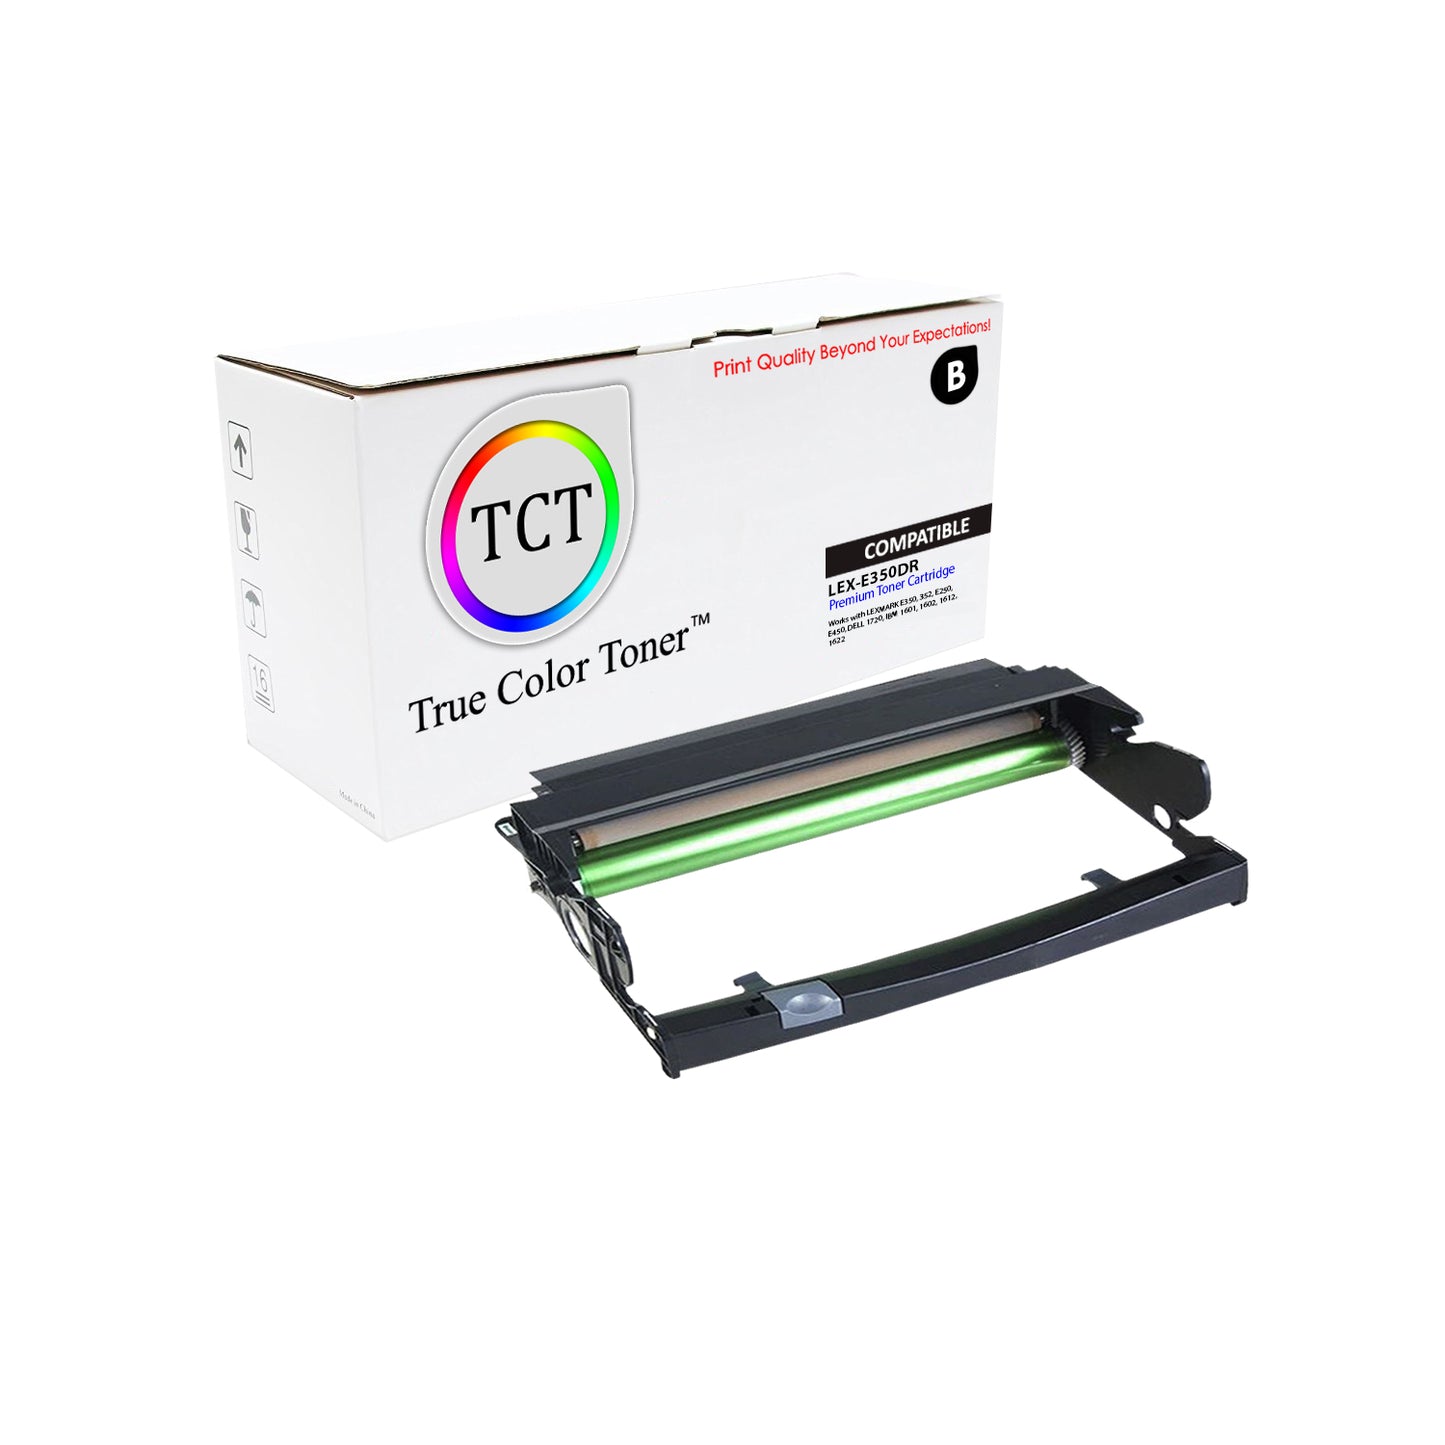 TCT Compatible Drum Unit Replacement for the Lexmark E350 Series - 1 Pack Black